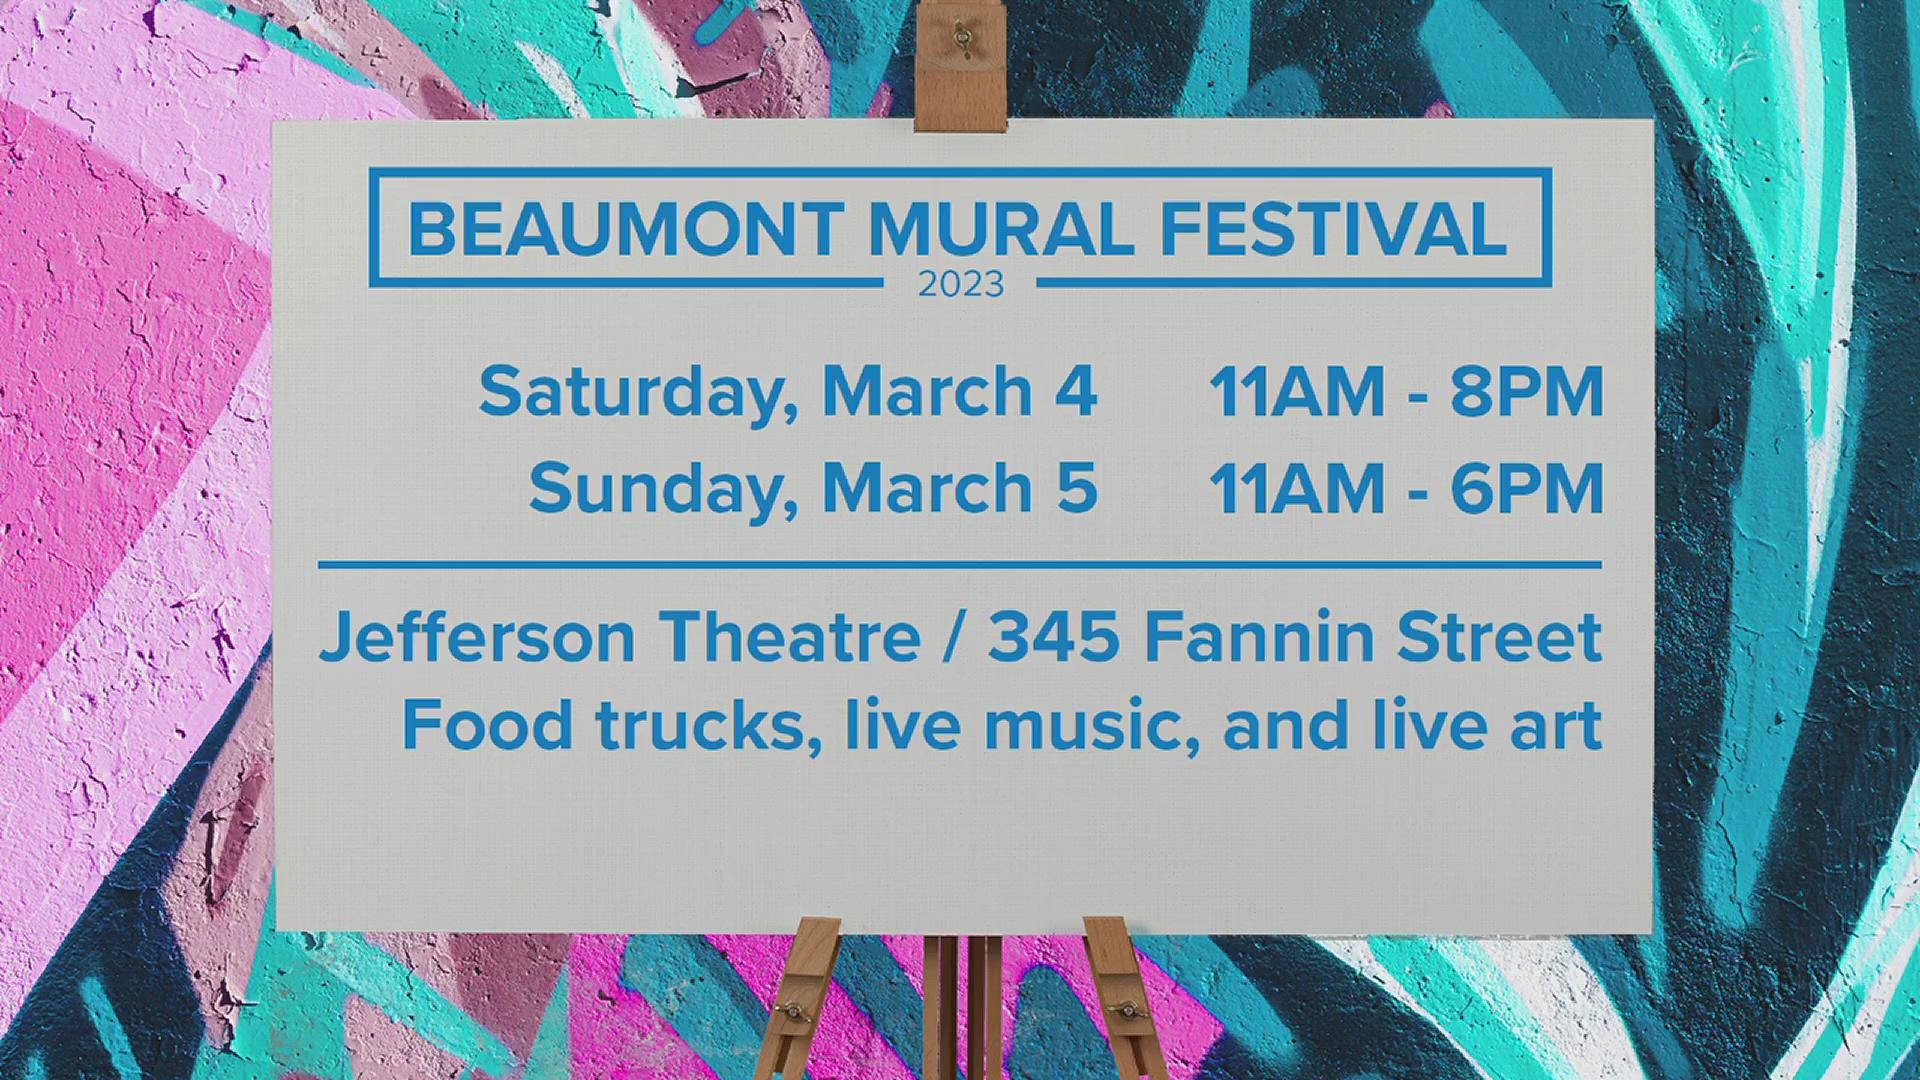 Participating artists will be painting throughout downtown Beaumont and the area to expand the public art scene.